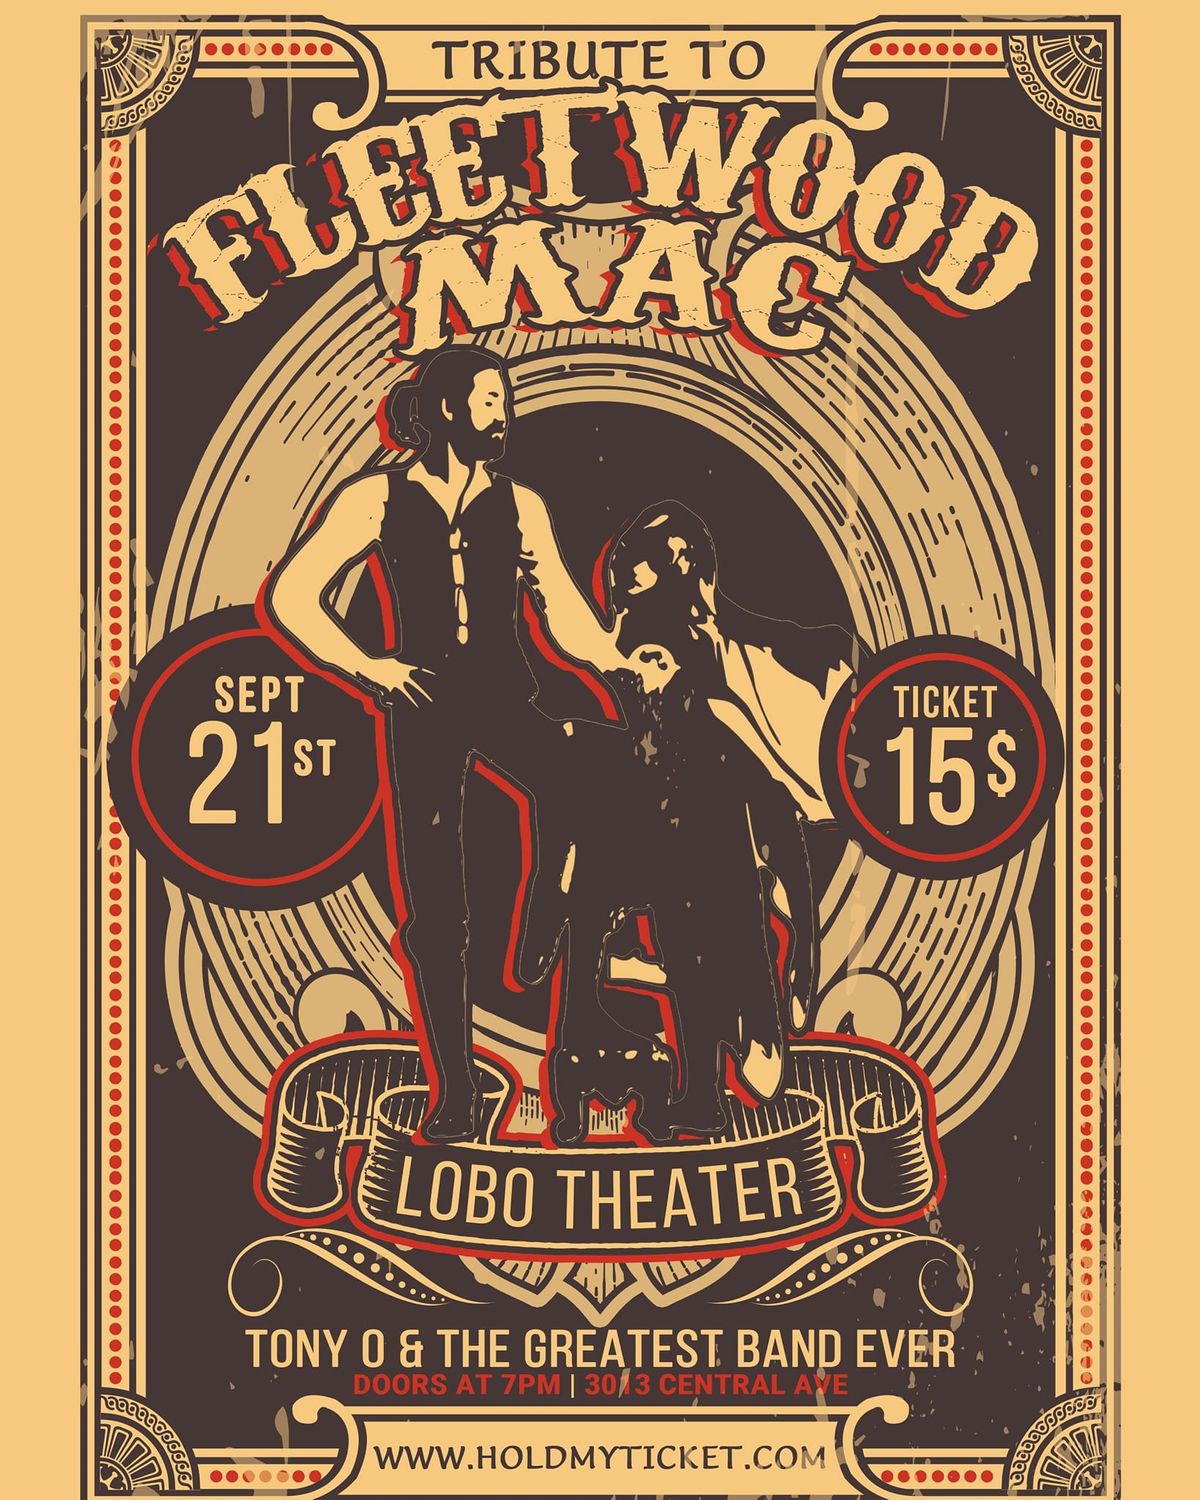 Tony O and the Greatest Band Ever present 'A Tribute to Fleetwood Mac"